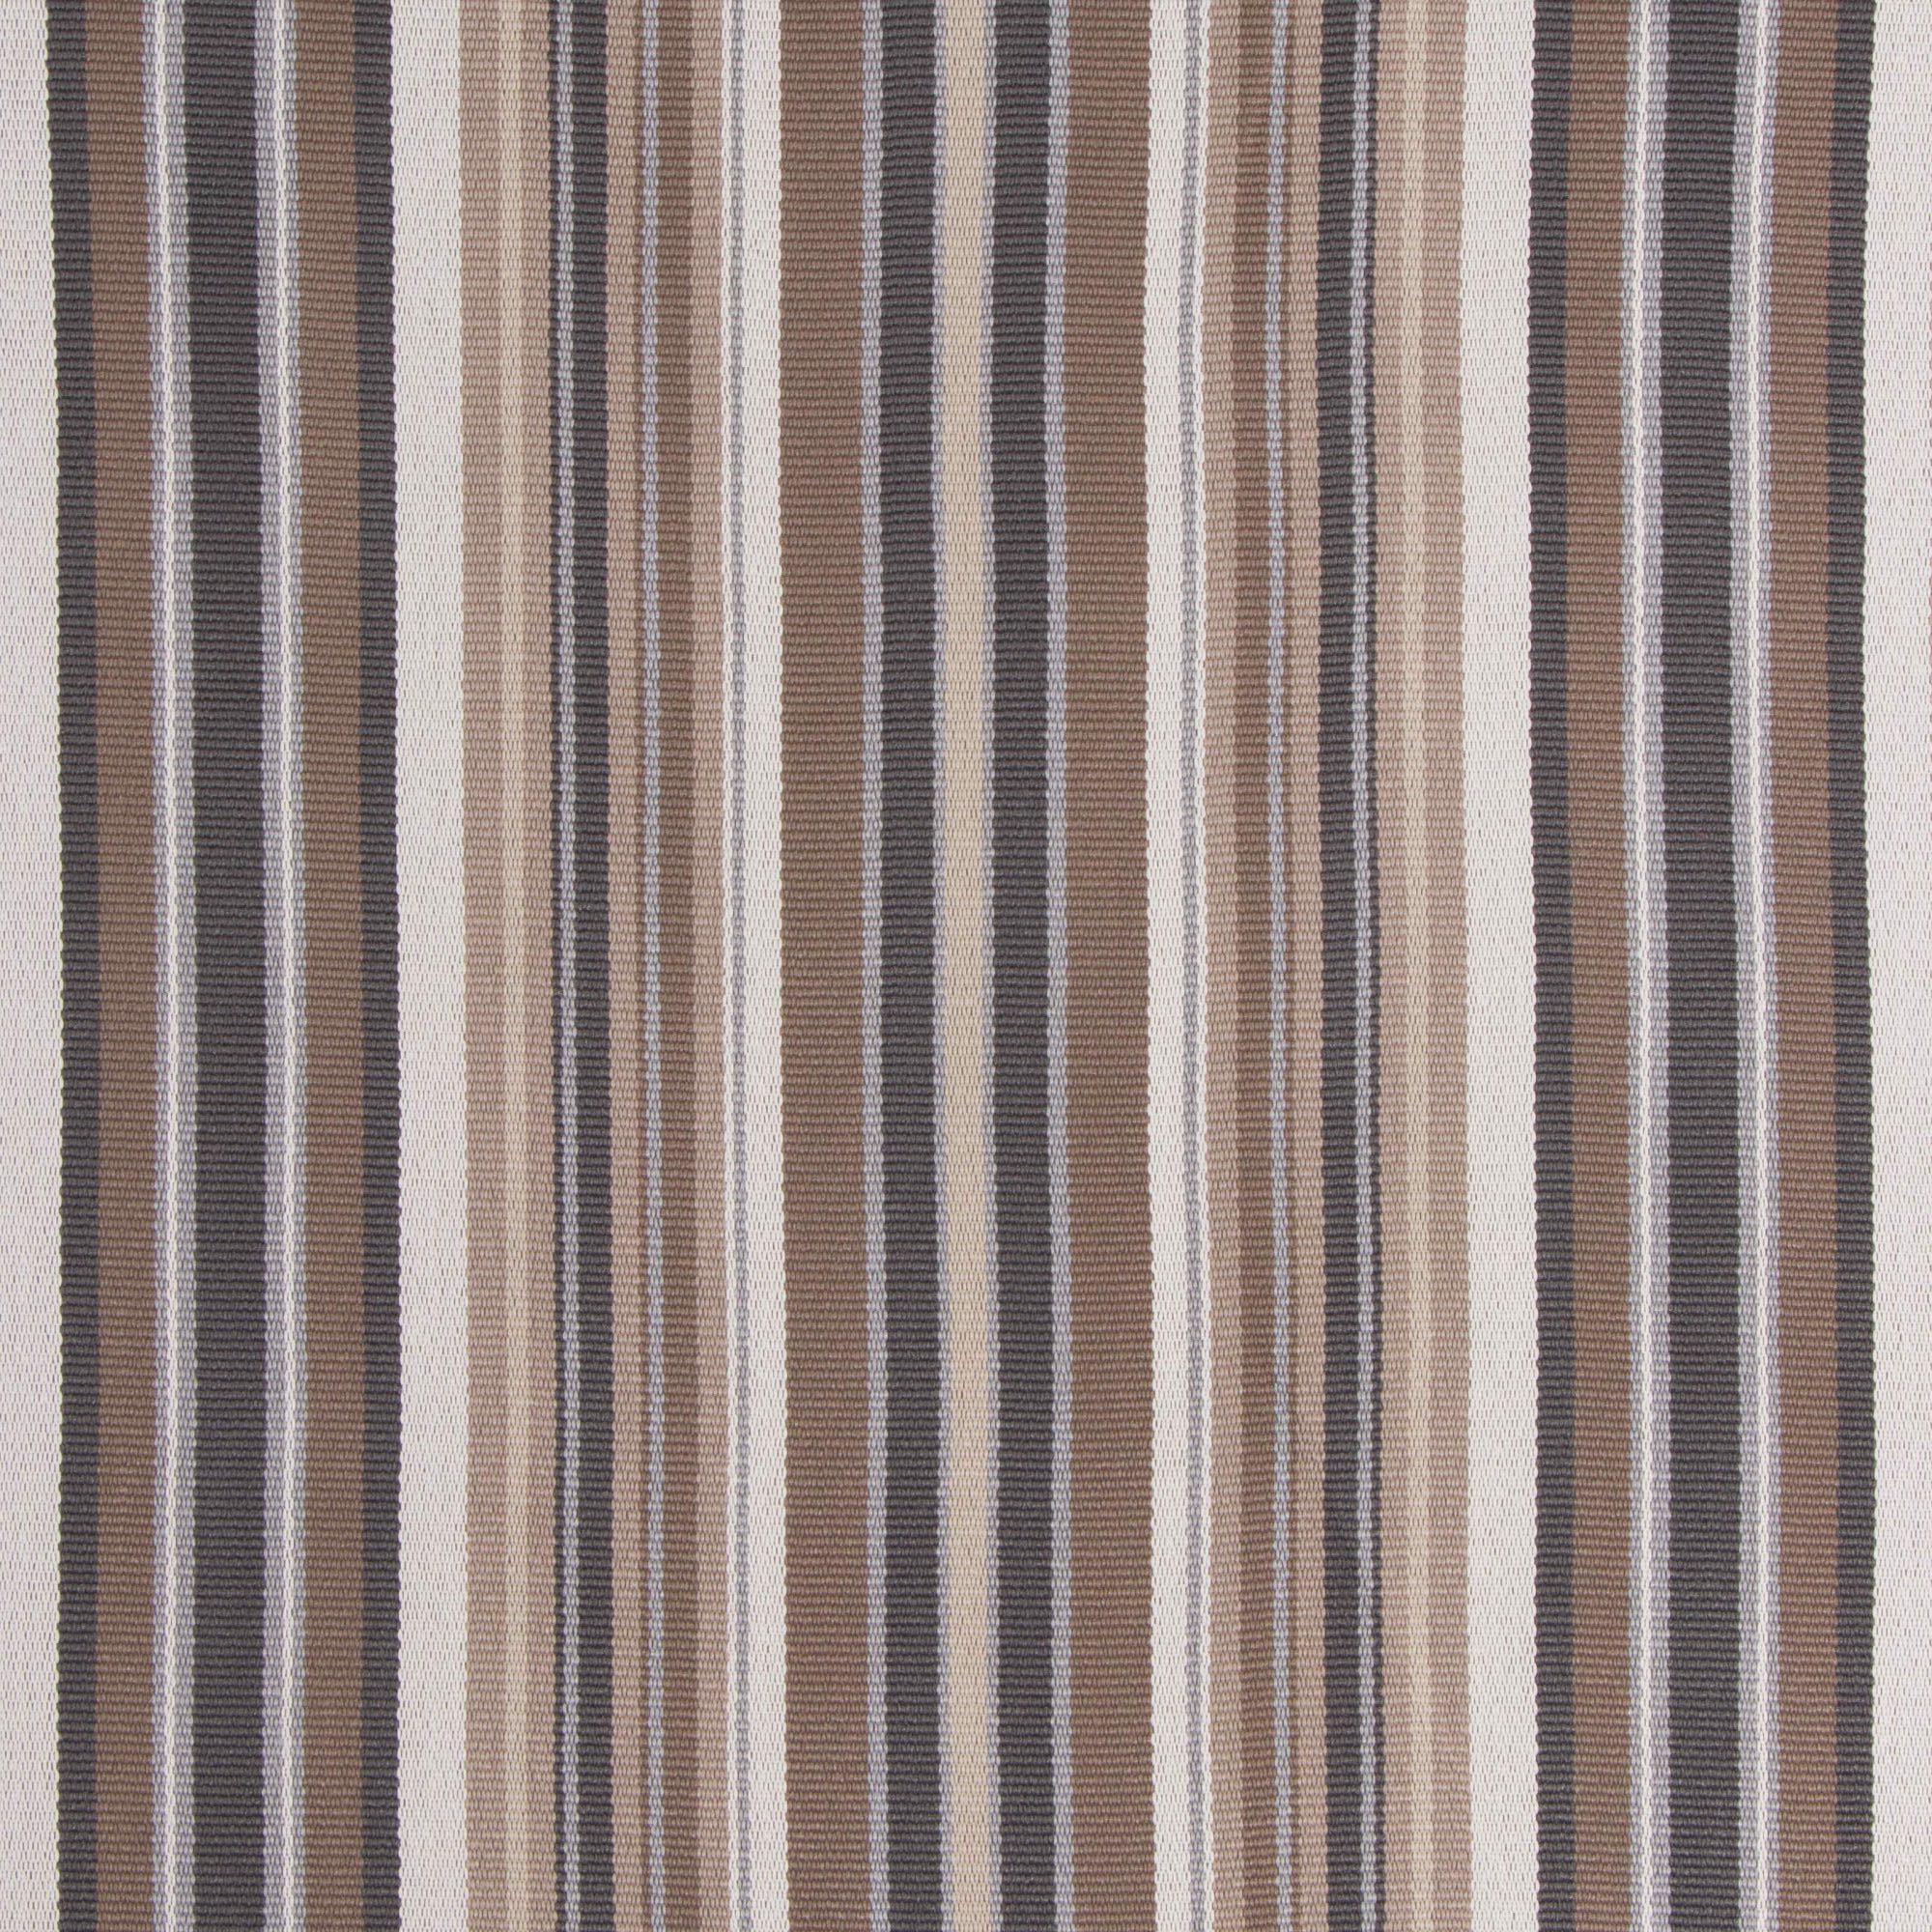 Fabric in the pattern Dexter and color Brindle from Bella Dura and Bella Dura Home.